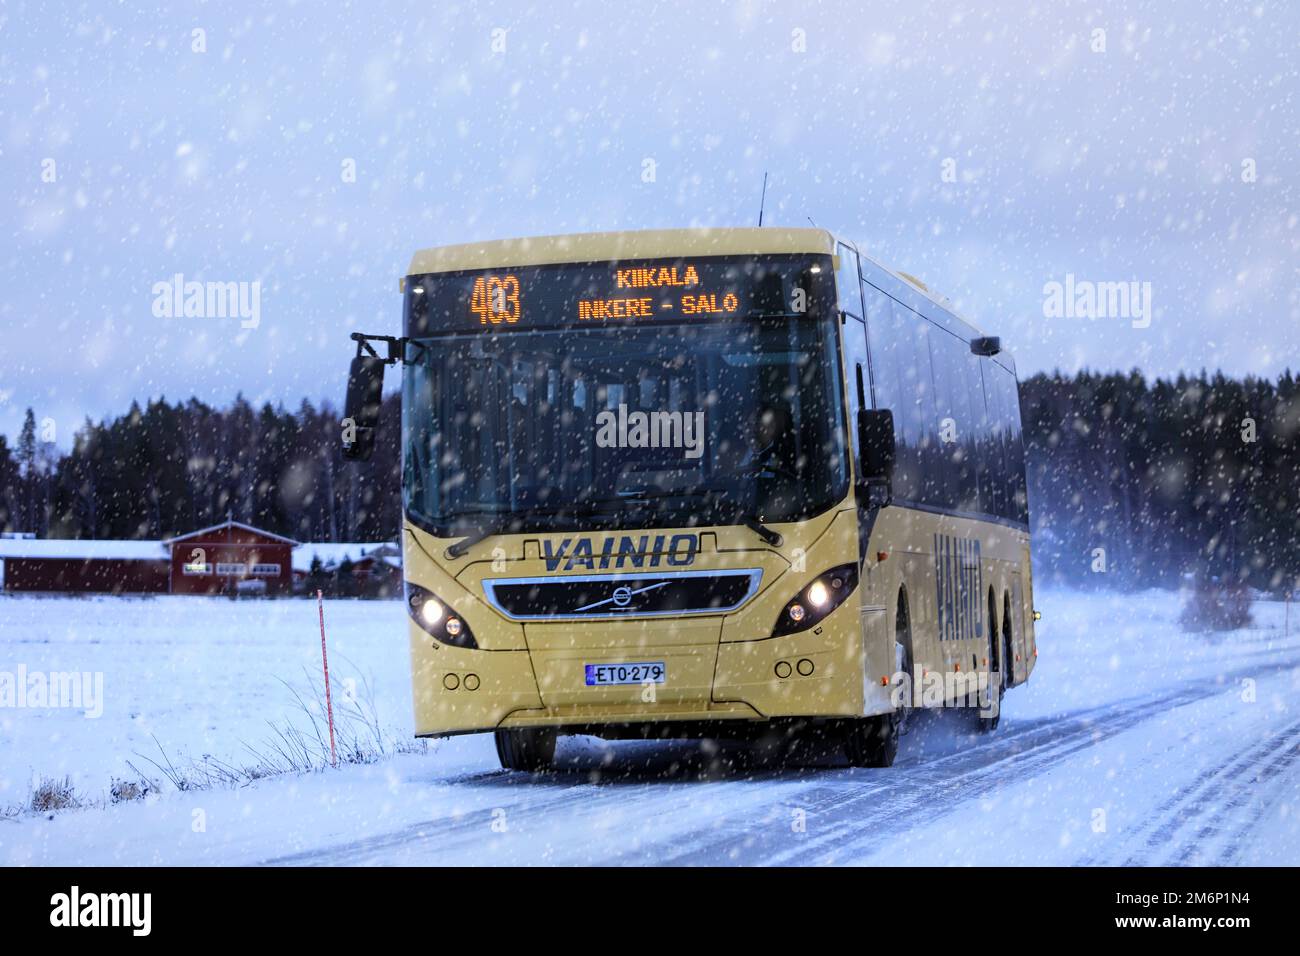 Yellow Volvo bus transports passengers along road in winter snowfall. Salo, Finland. December 28, 2022. Stock Photo